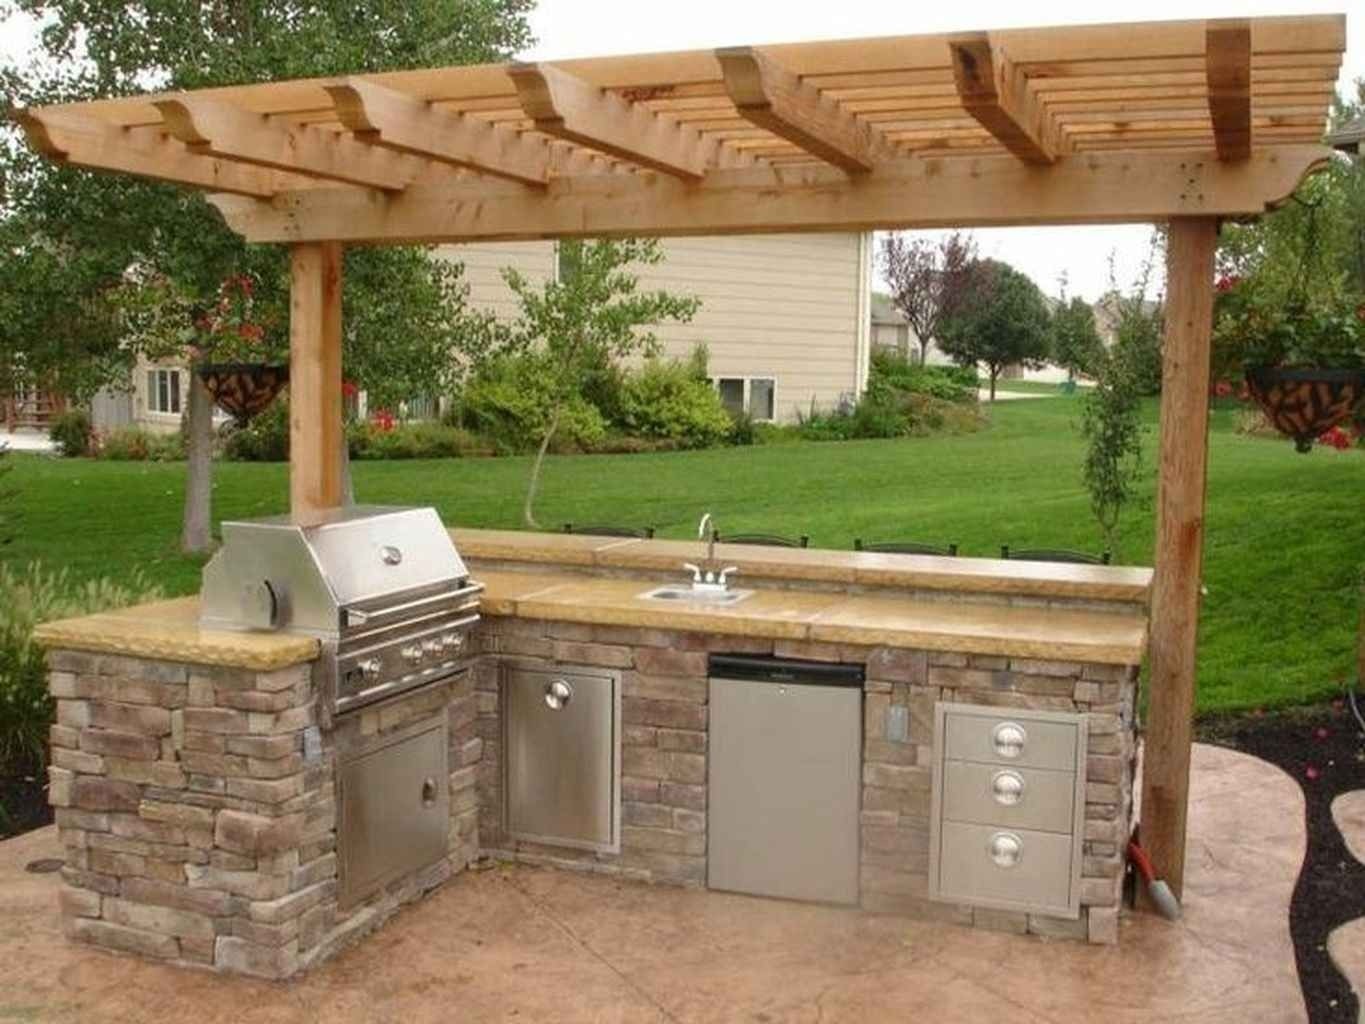 Small outdoor kitchen really looks great has everything you need